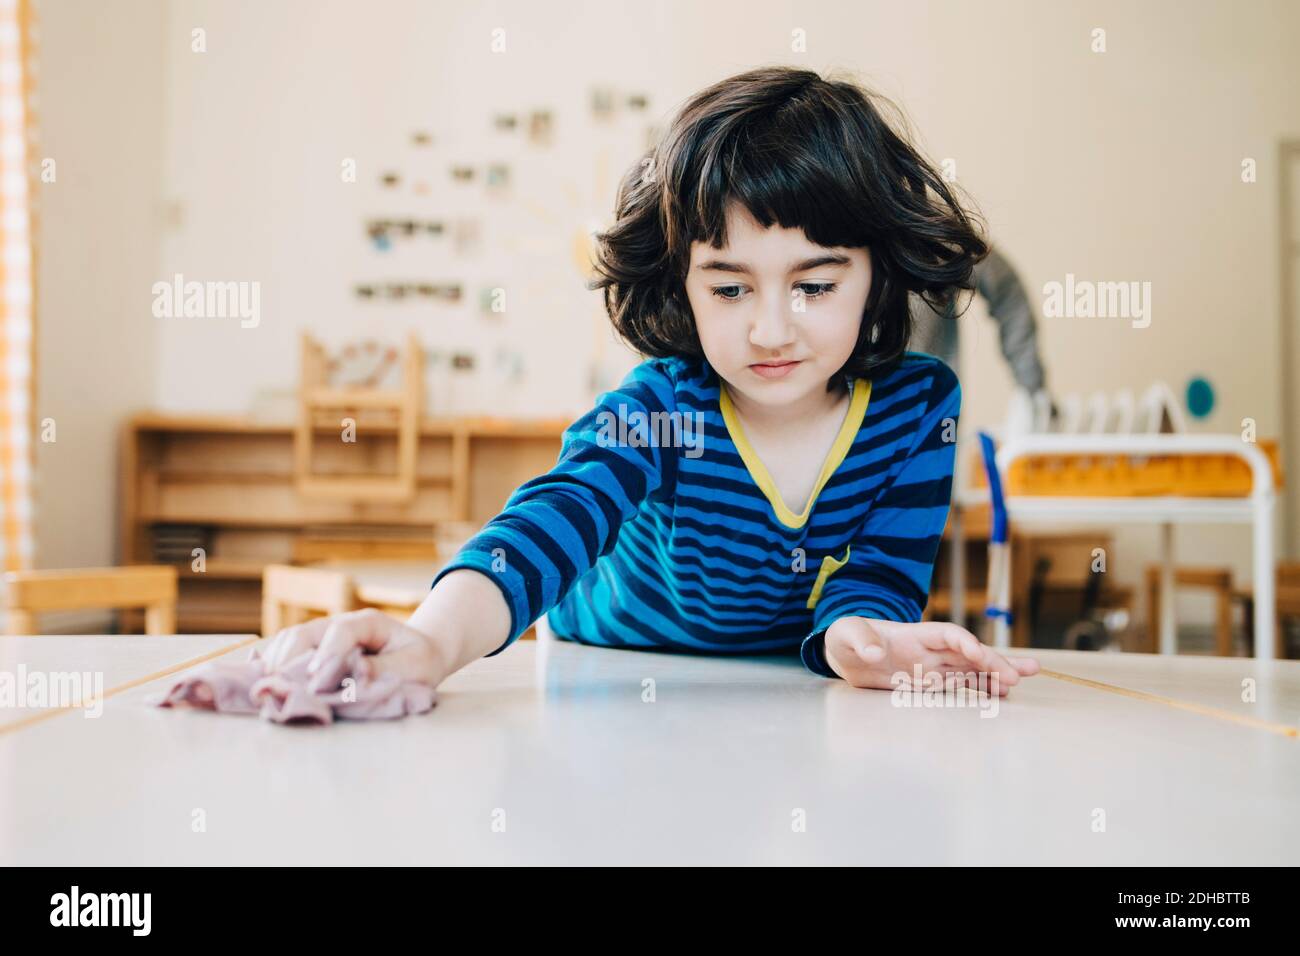 Boy cleaning table with dish cloth in child care classroom Stock Photo